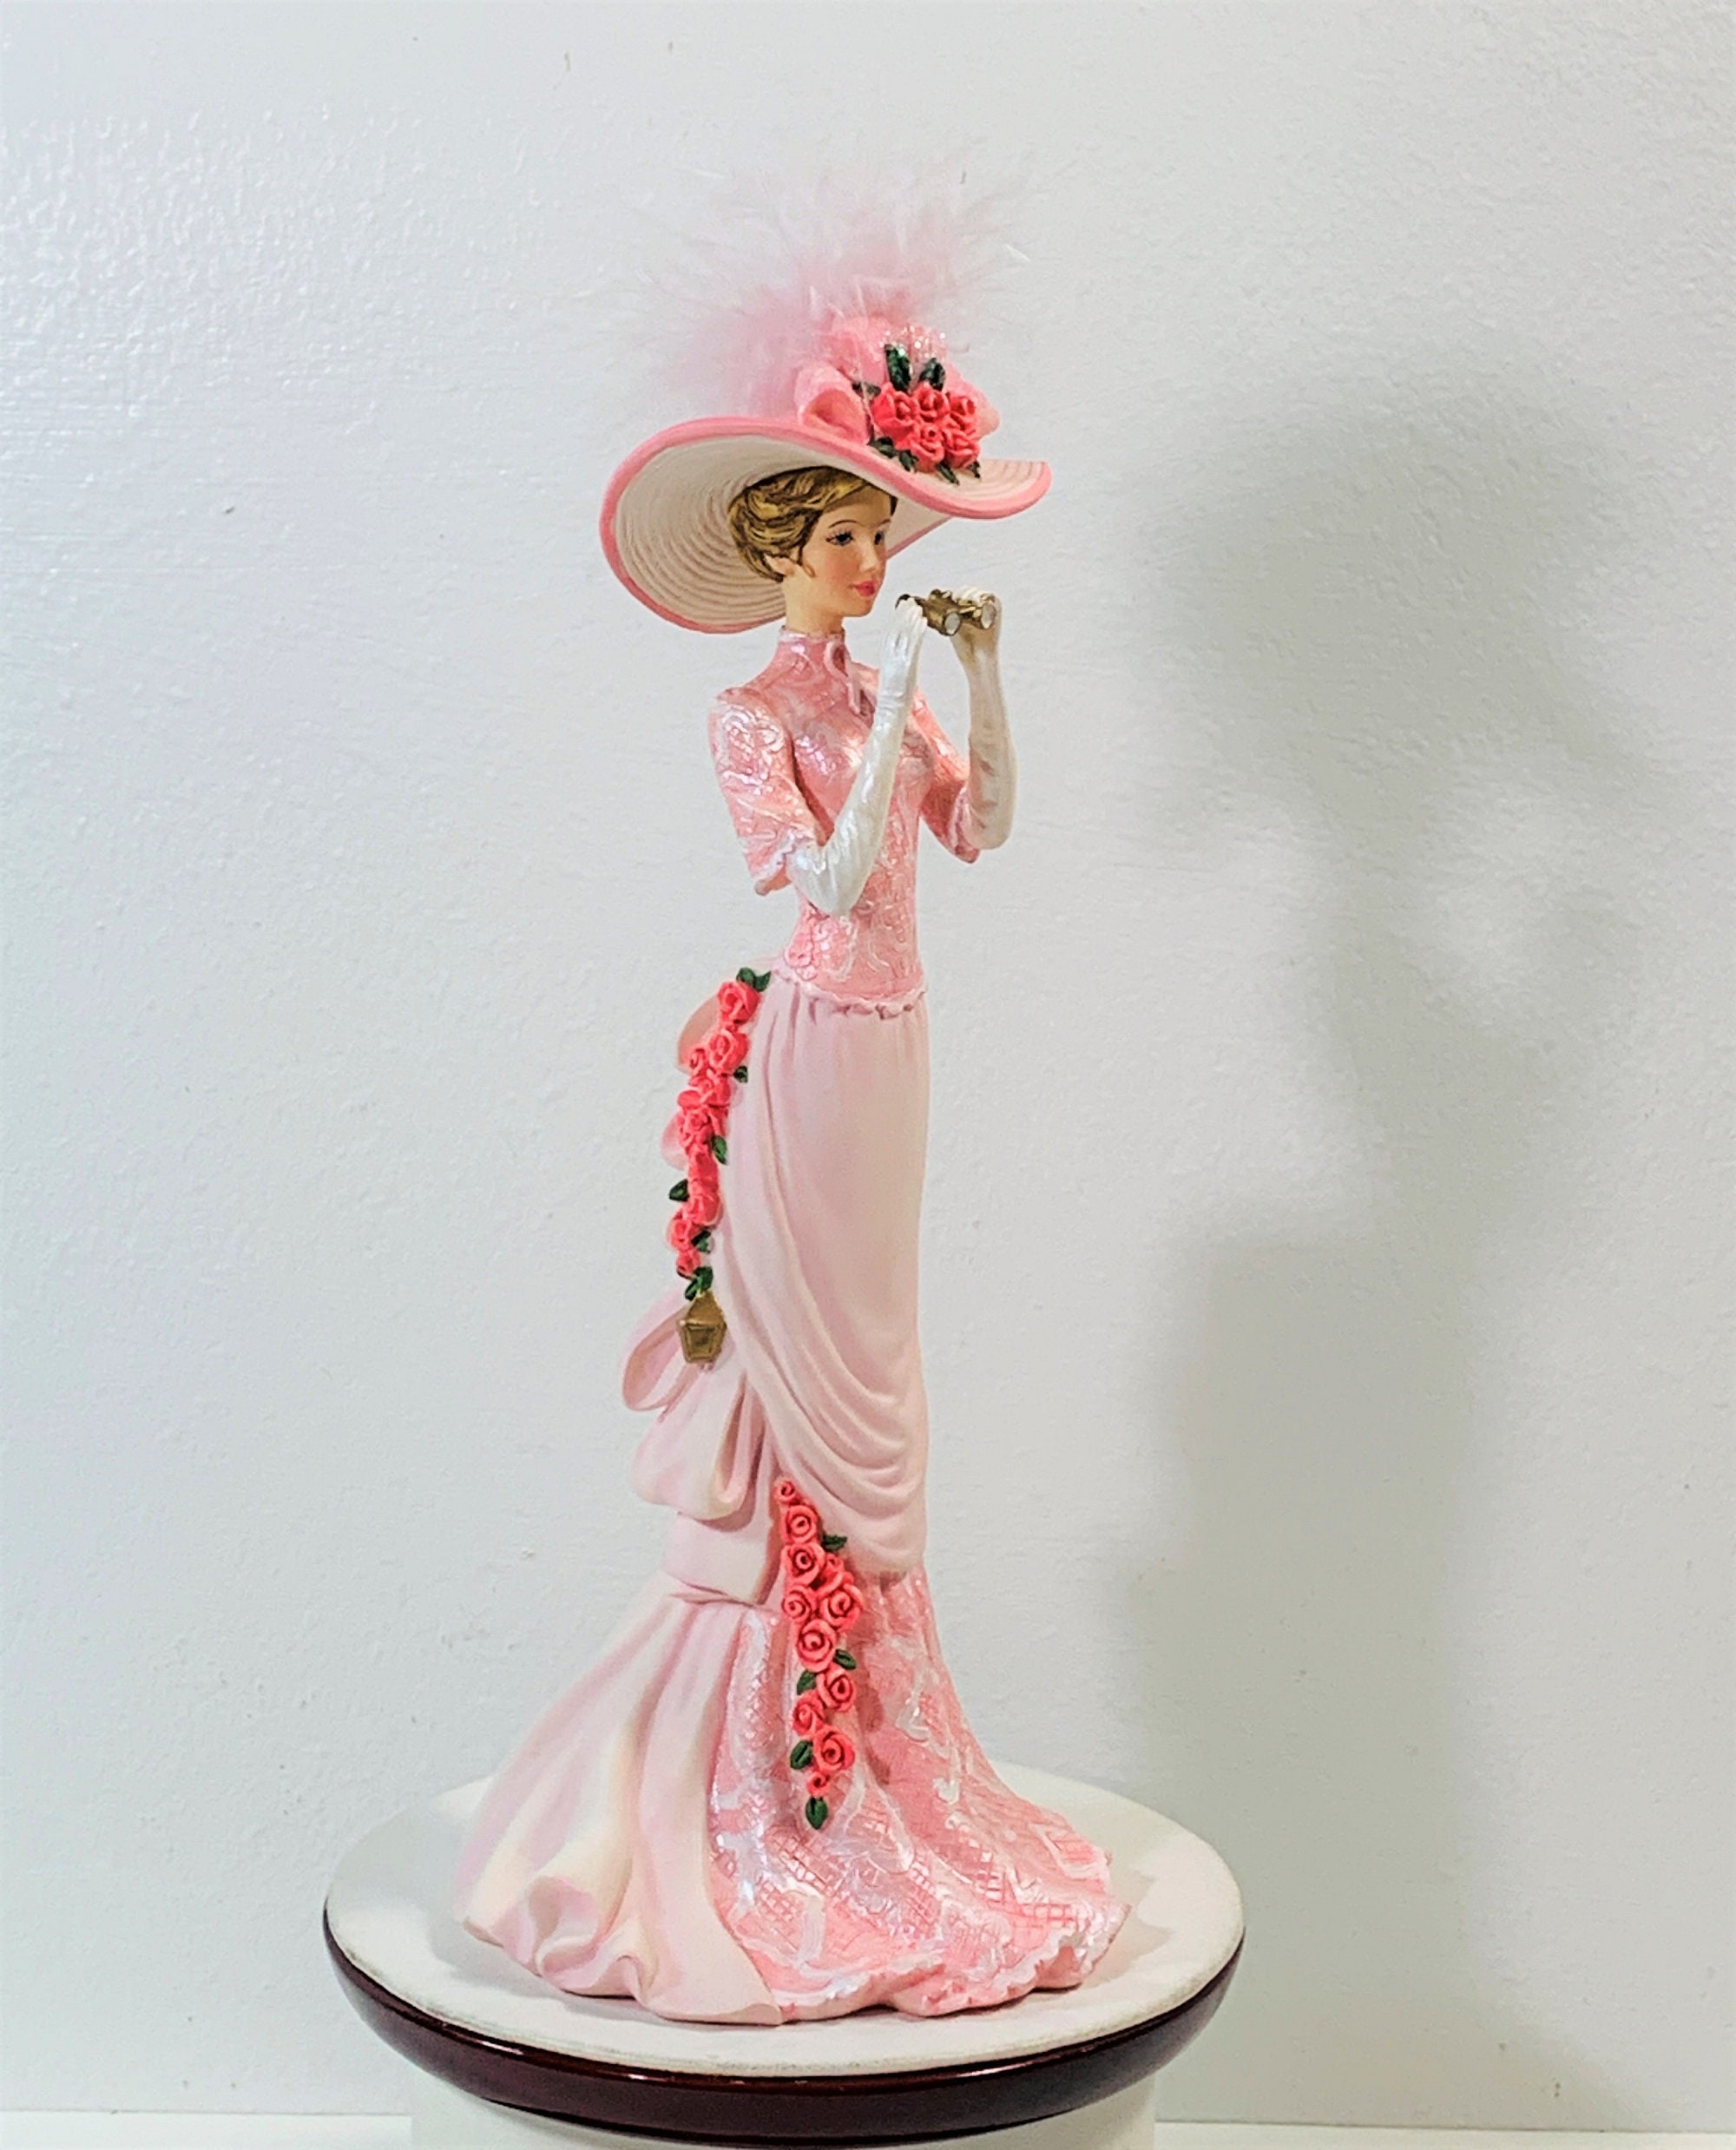 Thomas Kinkade Looking for a Lure Lady Figurine, Inspirations of Hope  Collection. No. 3099D. Mint Condition. 8.5 Tall. Free US Shipping.